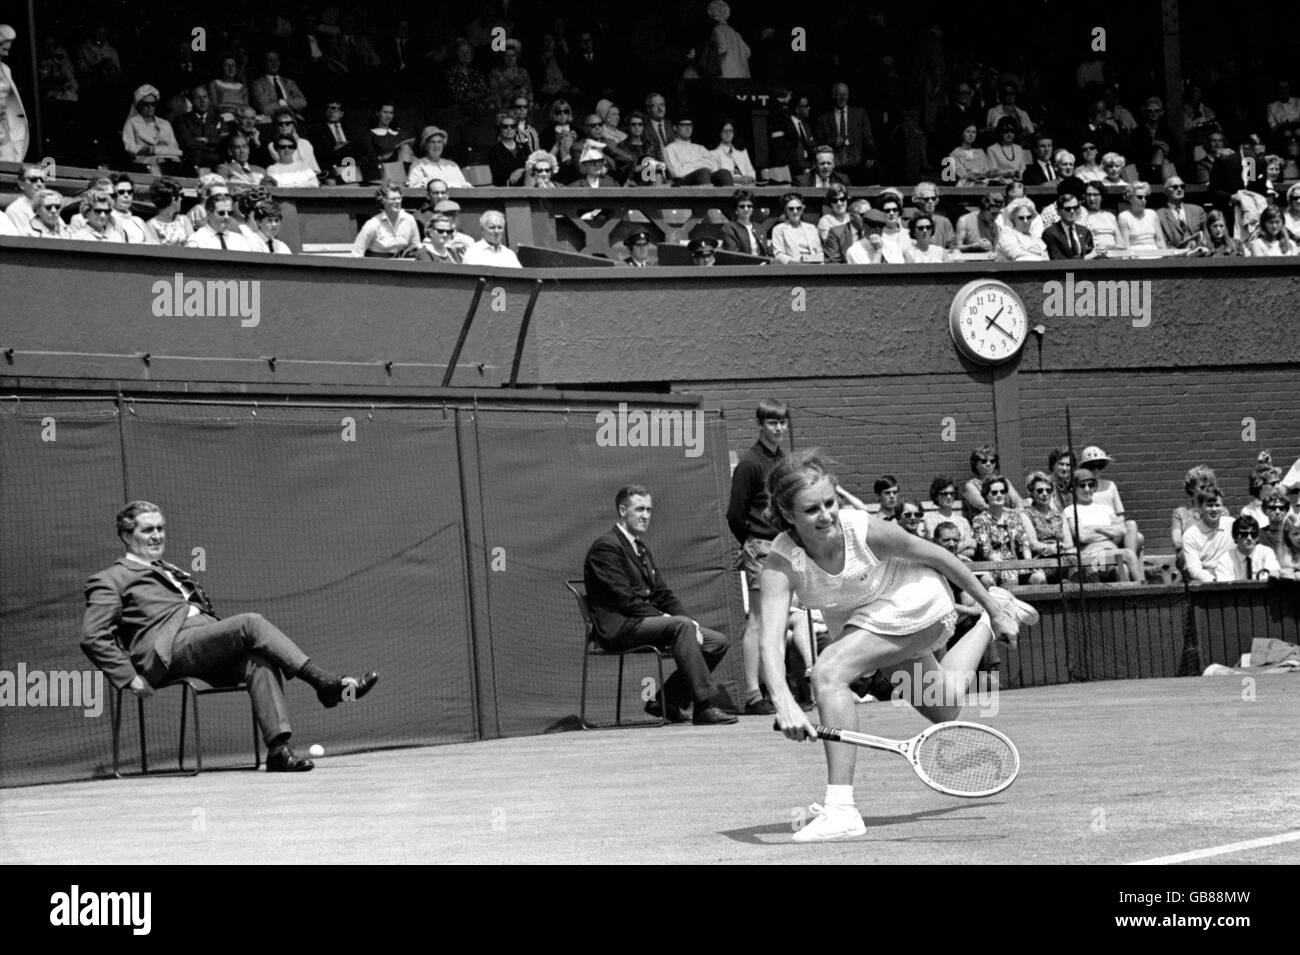 Tennis - Wimbledon Championships. HJ Amos returns from behind the baseline Stock Photo